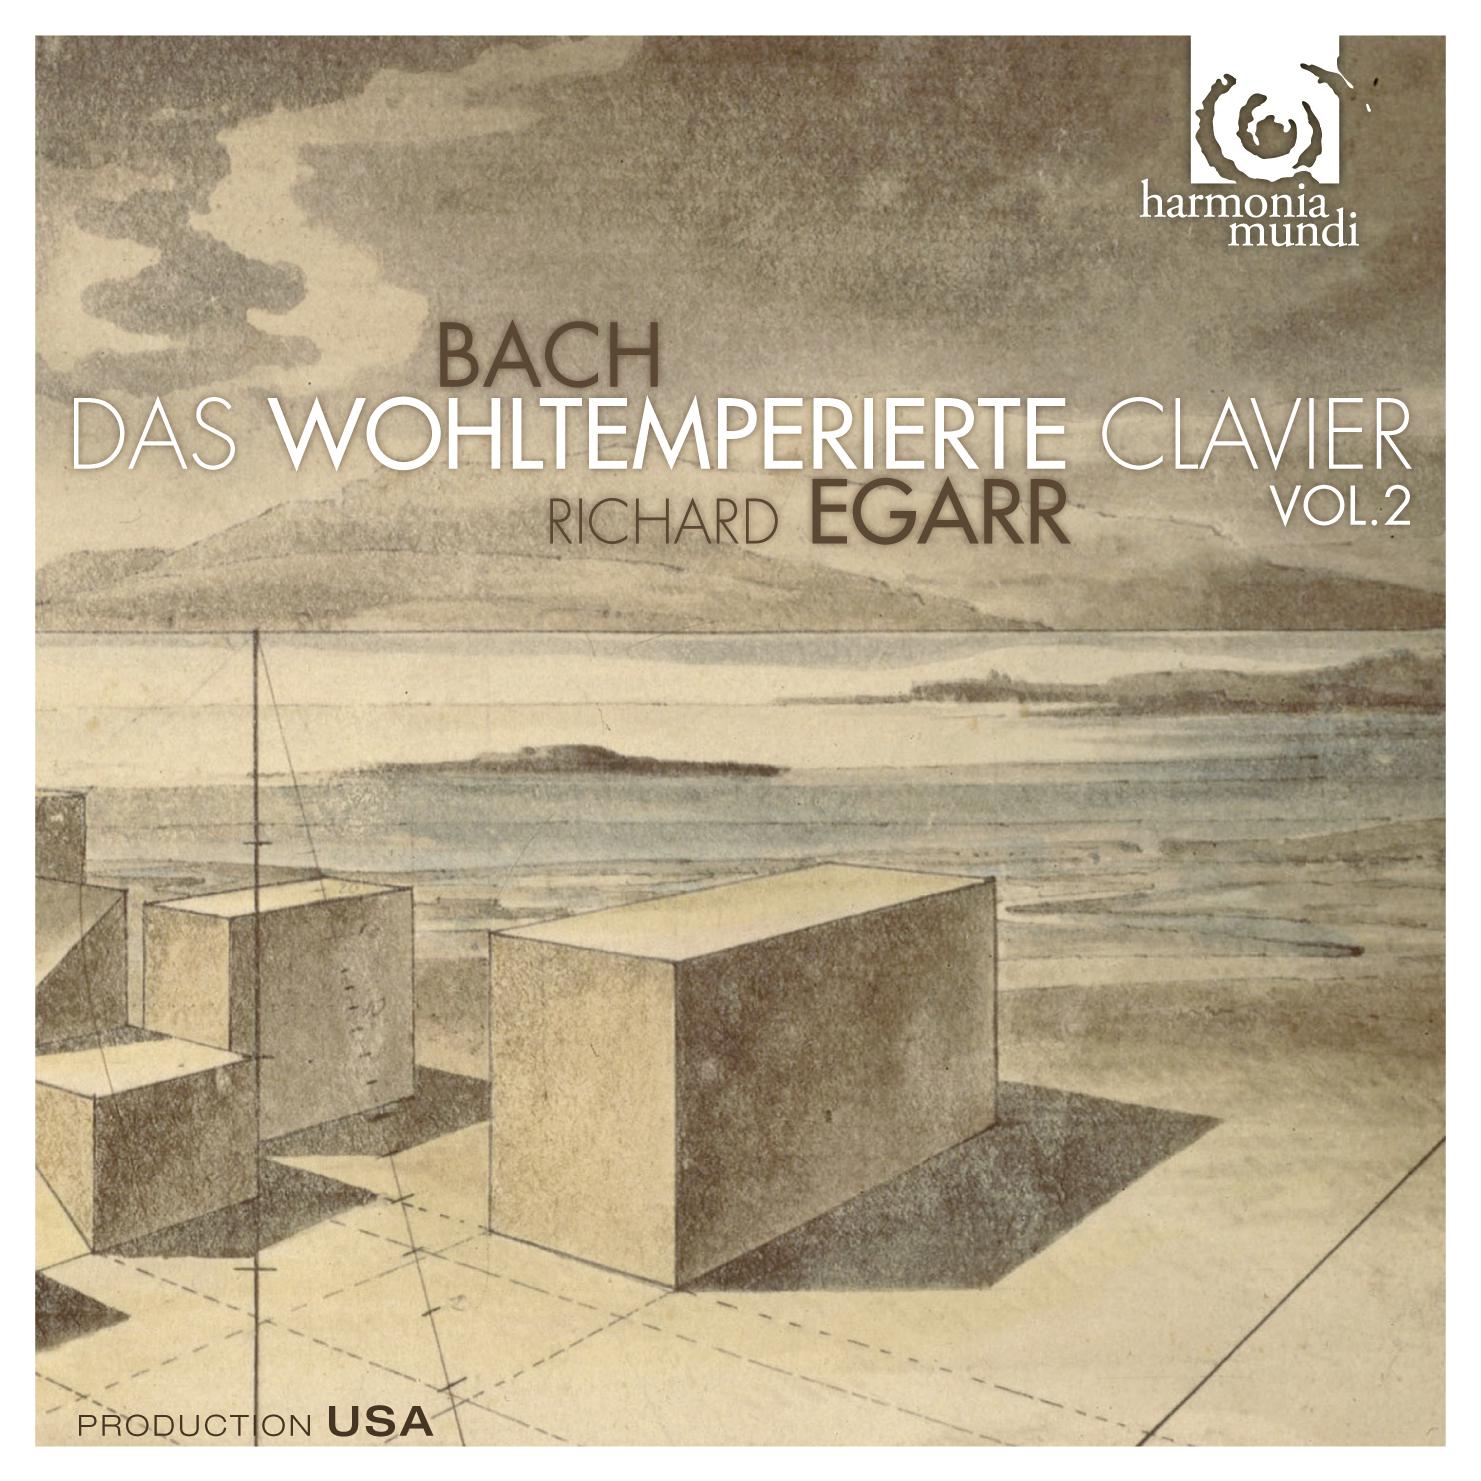 Well-Tempered Clavier, Book II, BWV 870-893: Prelude I in C Major, BWV 870